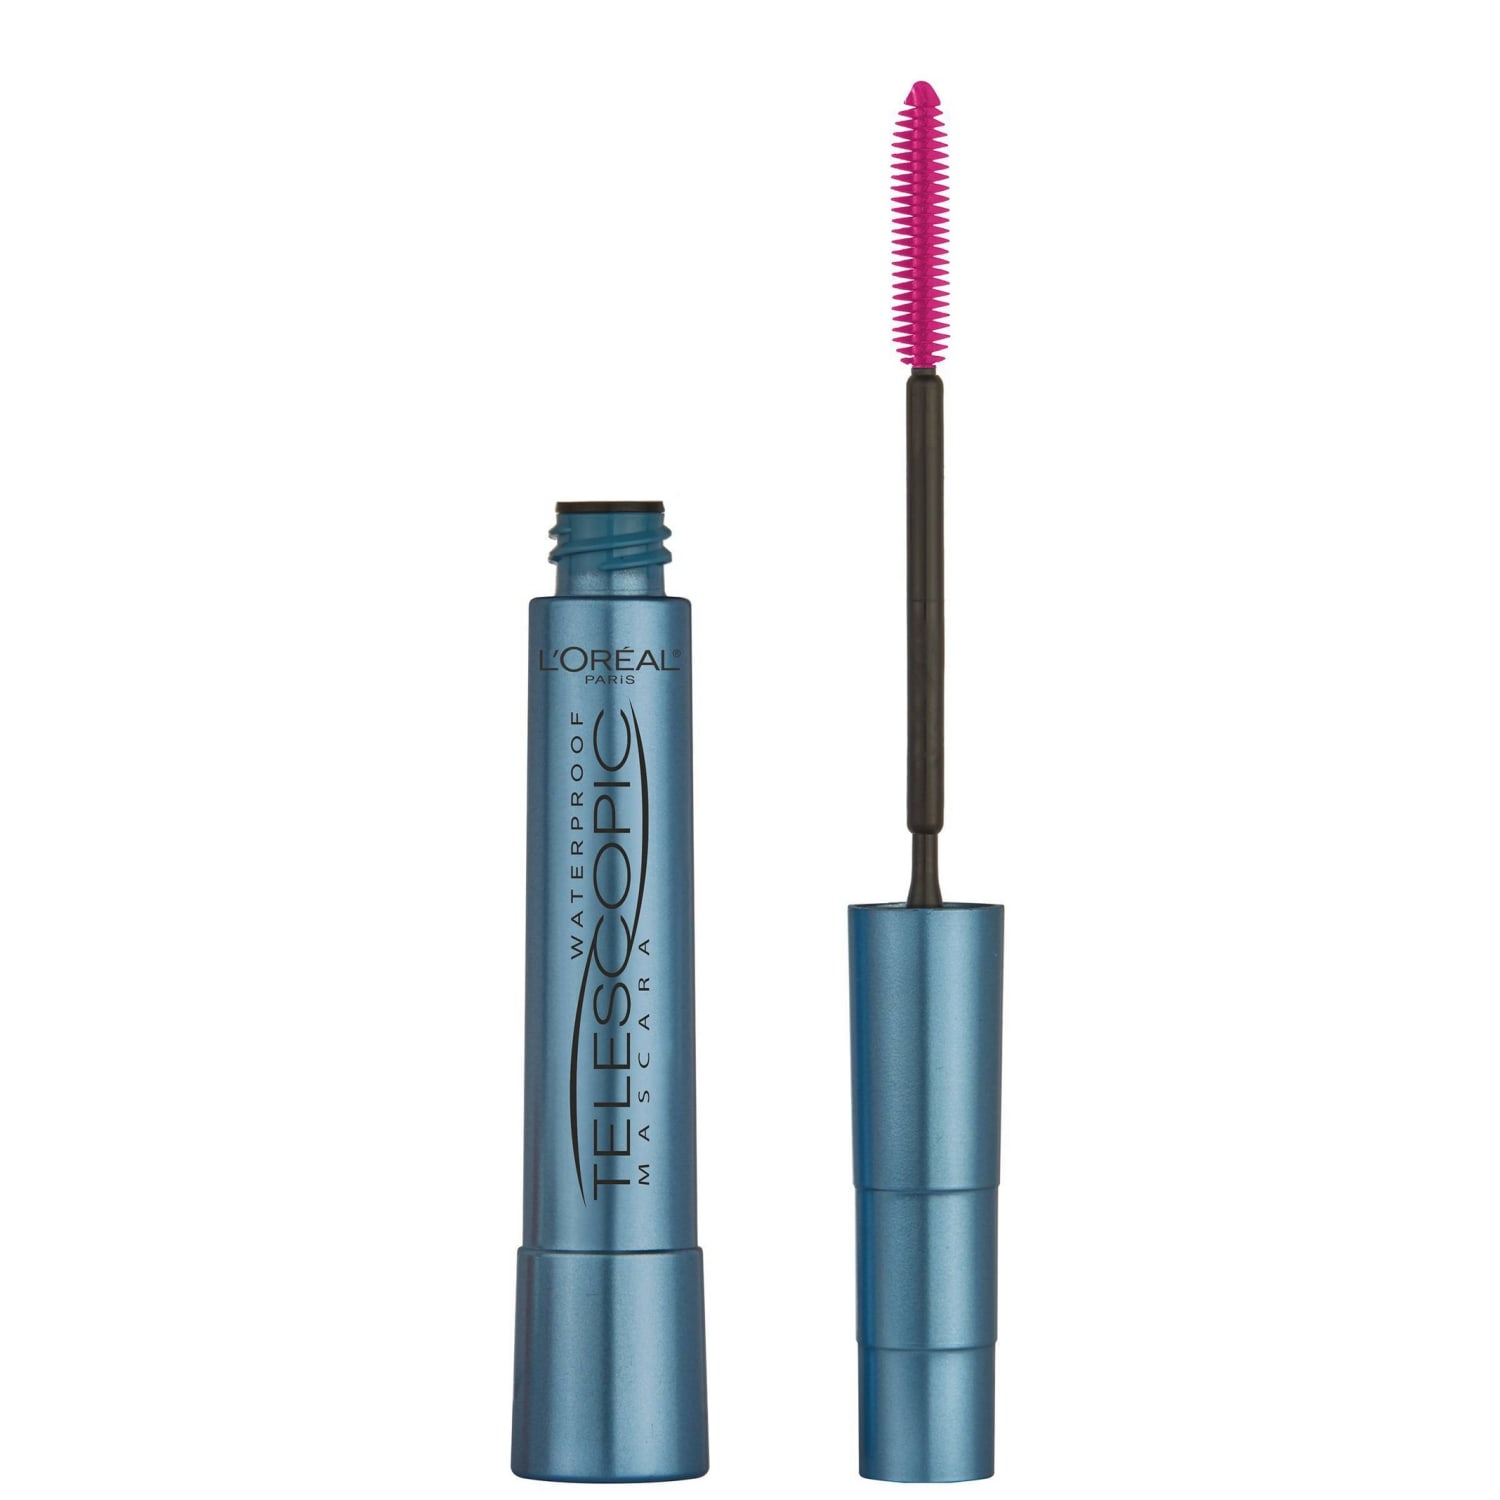 L'Oreal Paris Telescopic Lift is the £12.99 mascara that has caused major  drama on TikTok. We see if it's worth the lash-lengthening hype.